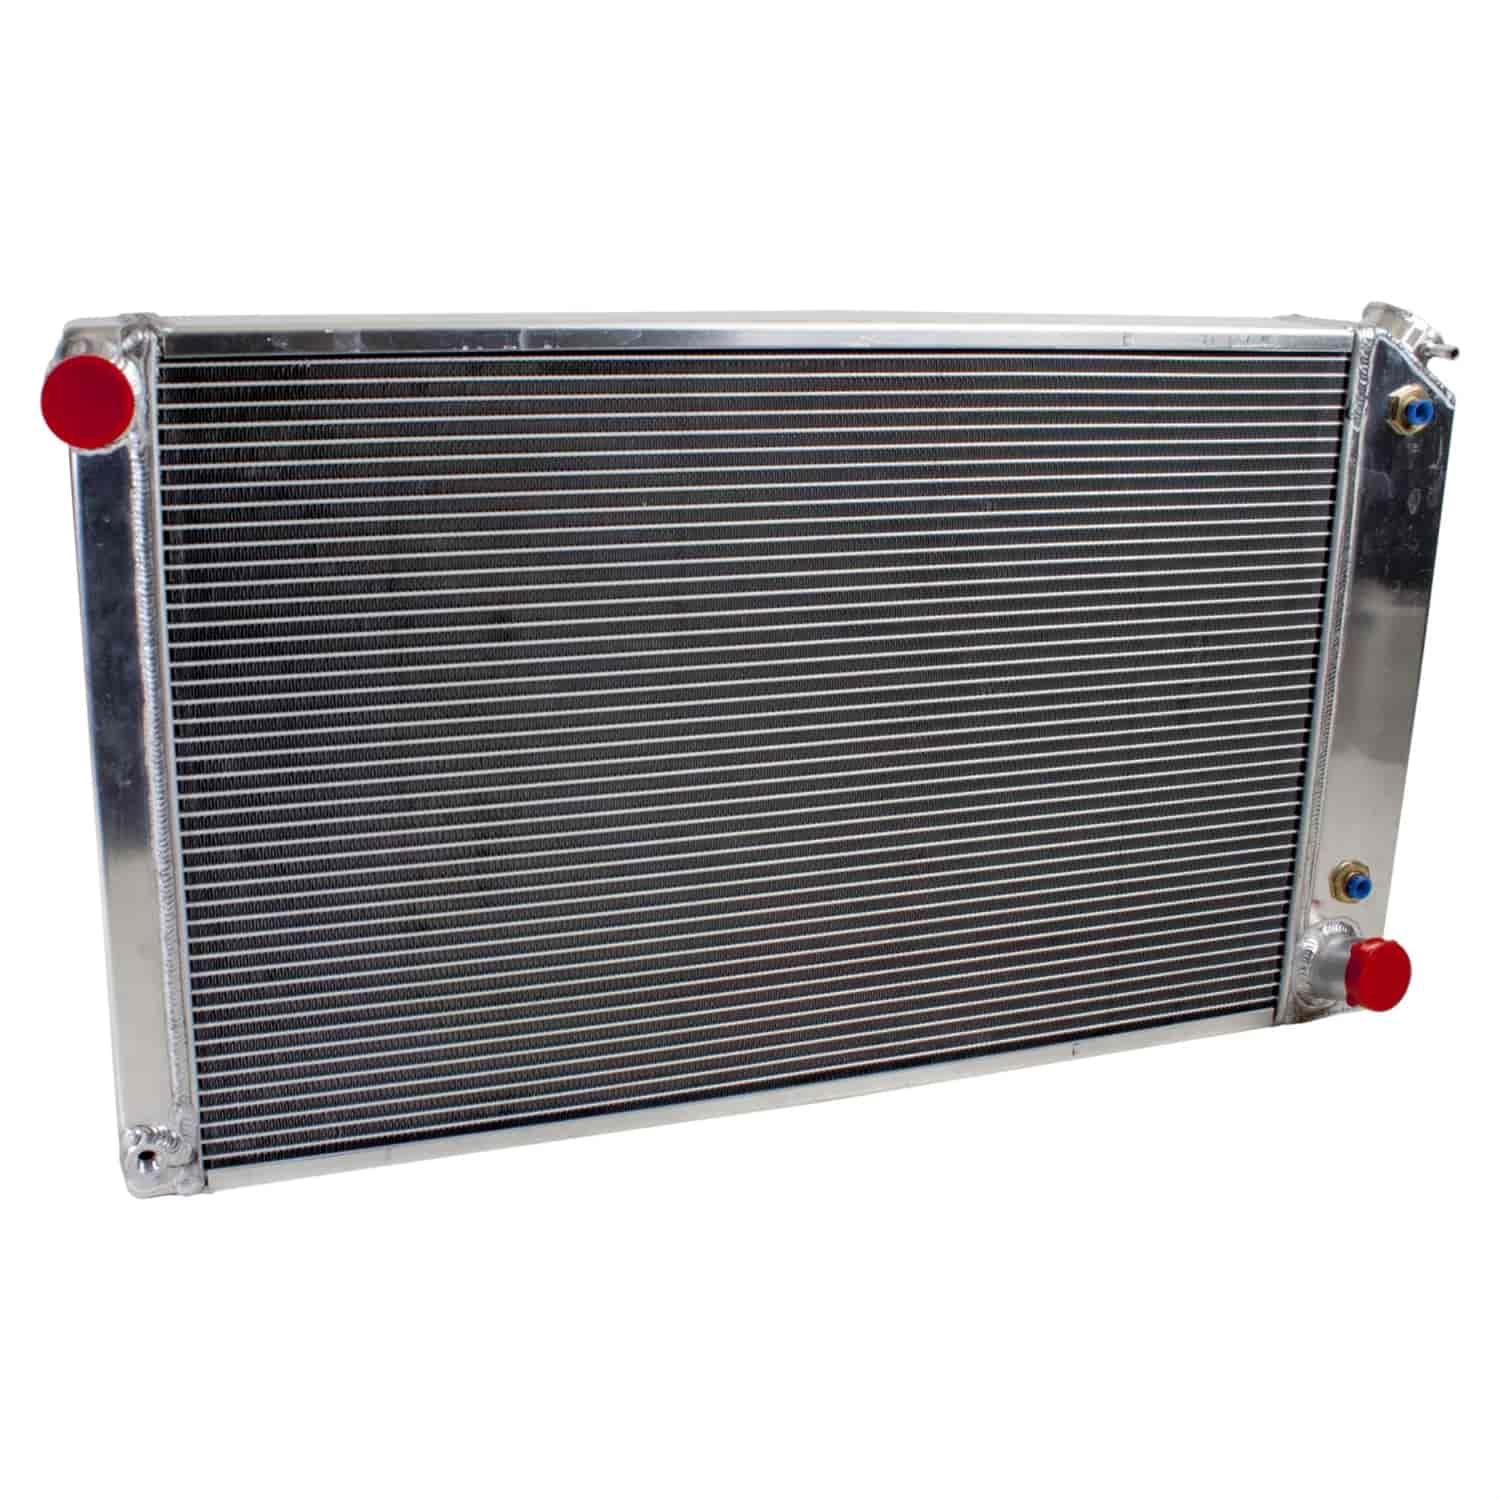 PerformanceFit Radiator for 1967-1991 Chevy/GMC C/K Series Truck/Blazer/Suburban with Transmission Cooler